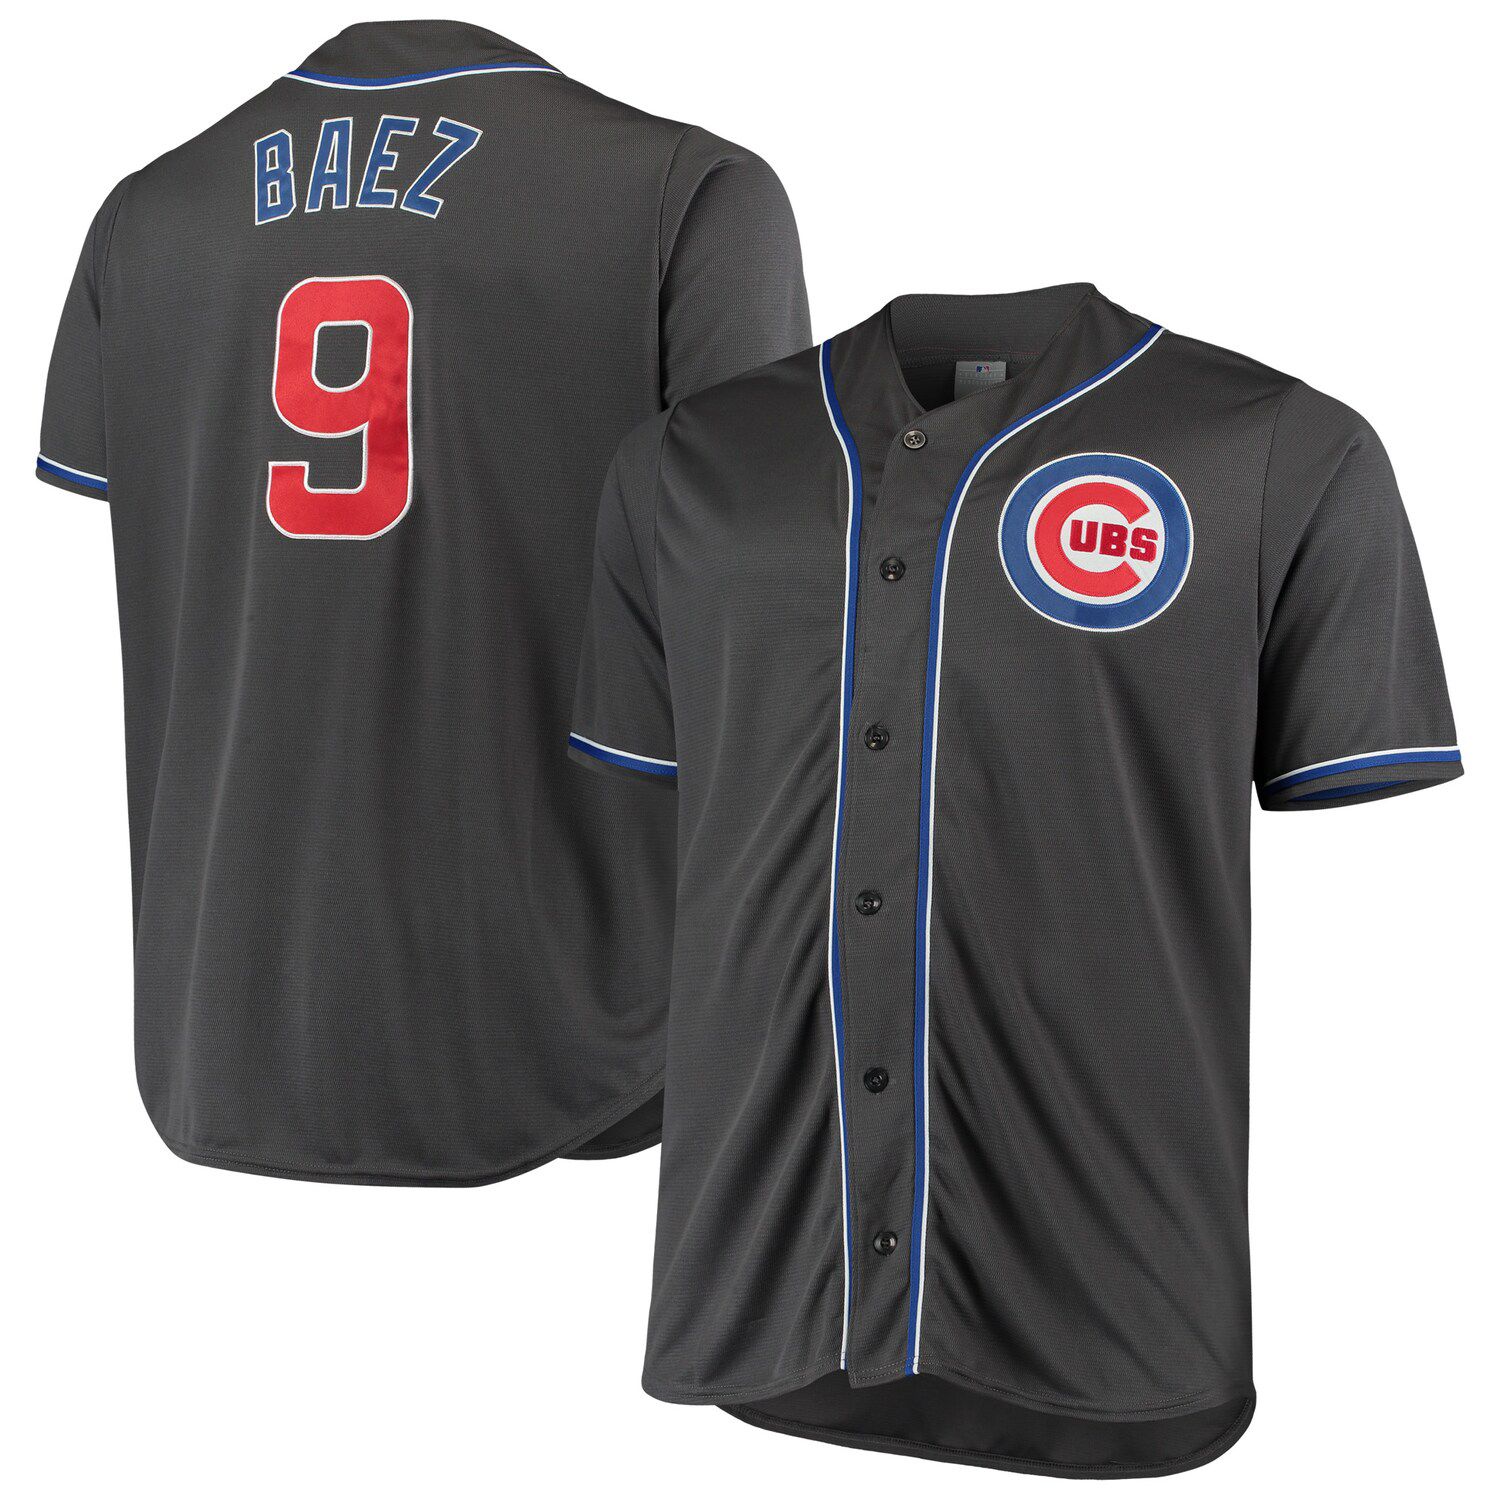 what cubs jersey should i get